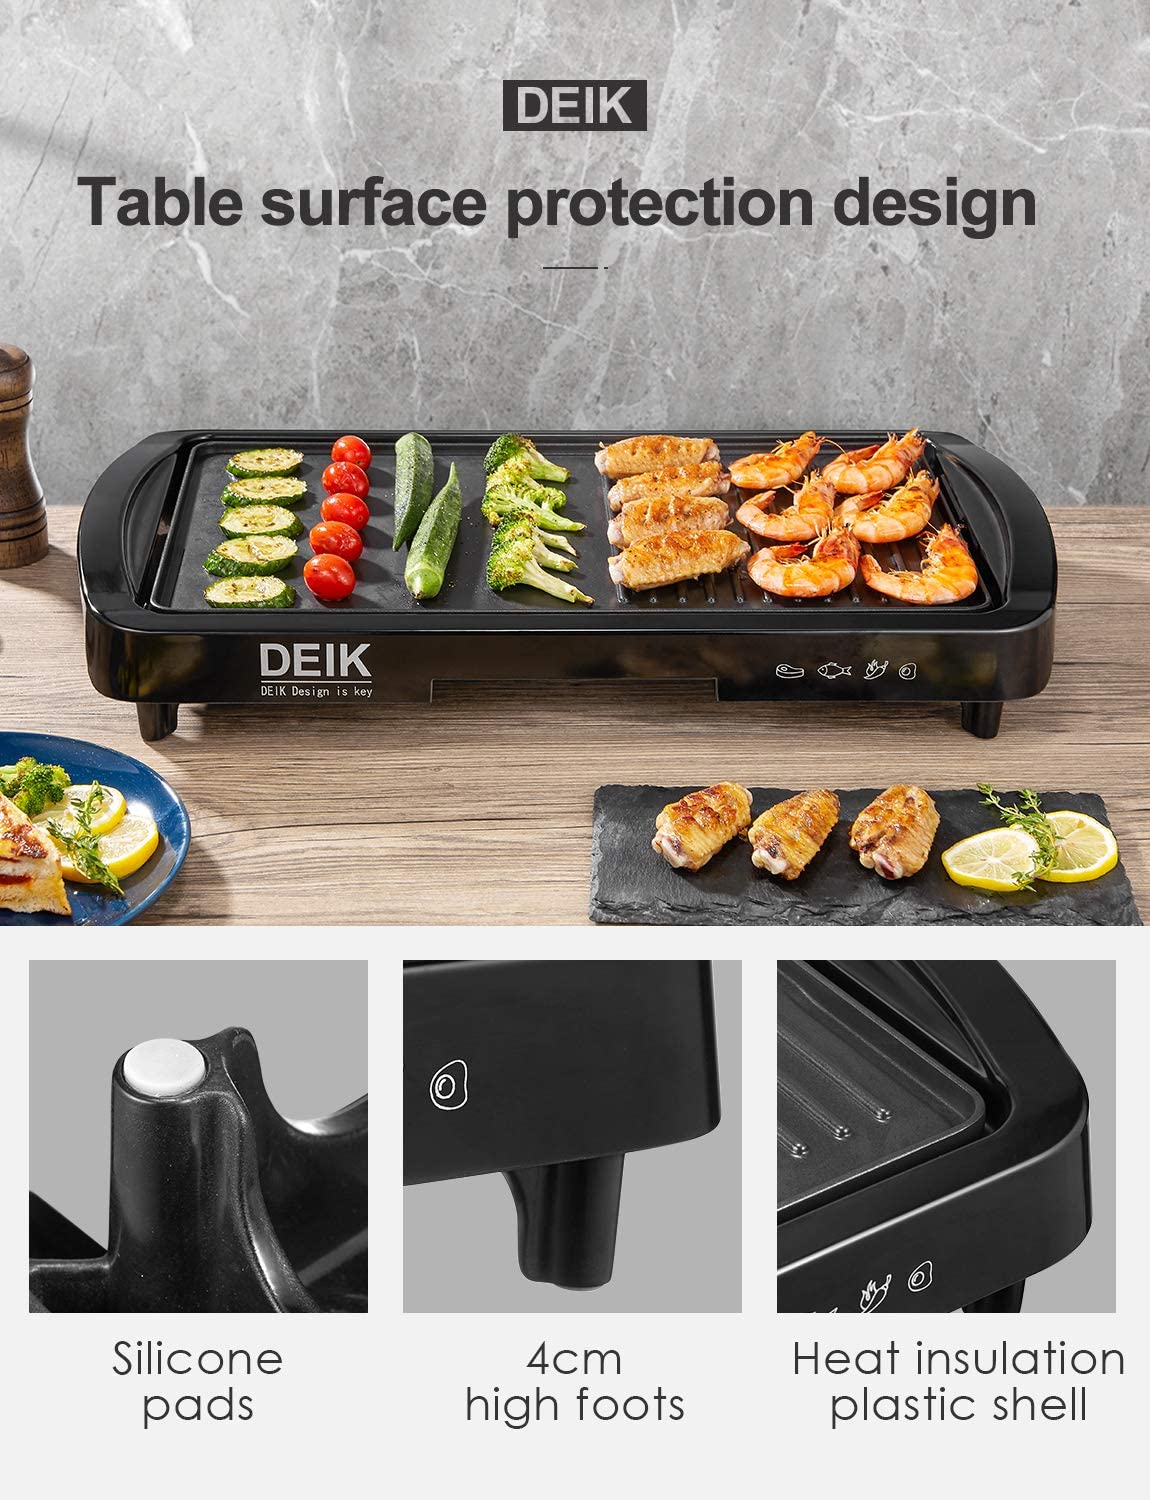 Family Sized Electric Griddle